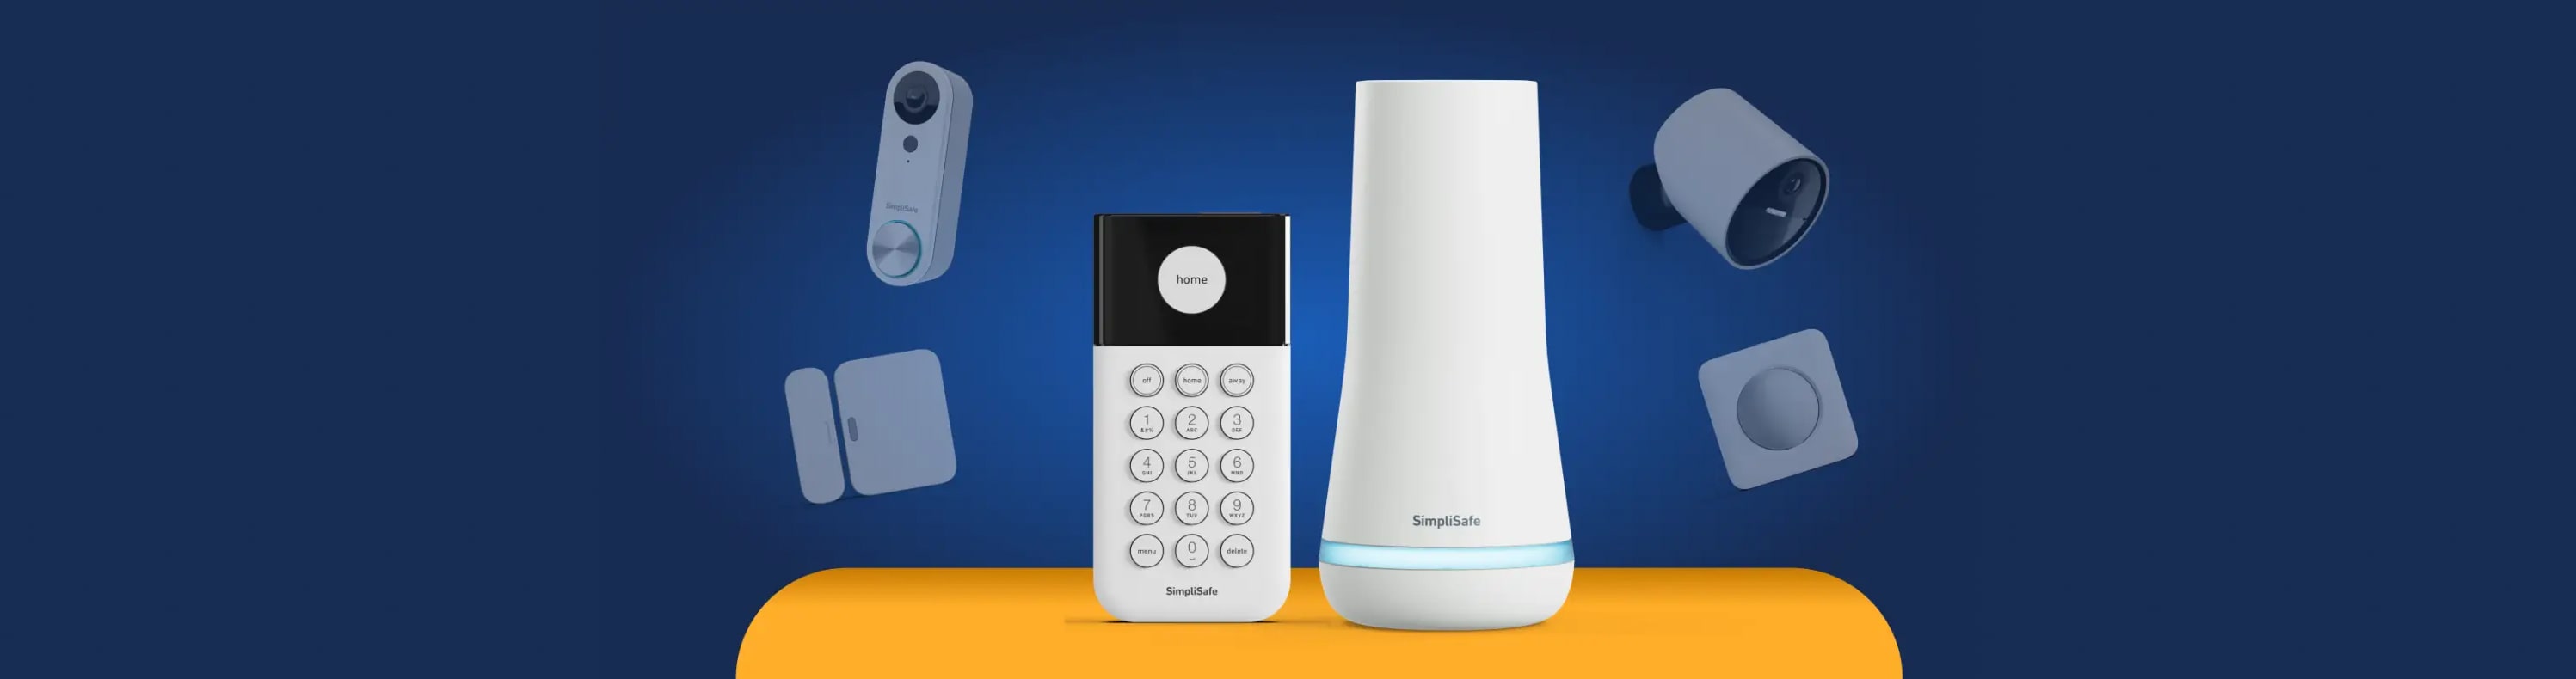 SimpliSafe is a home protection company that generates a lot of data through IoT devices.